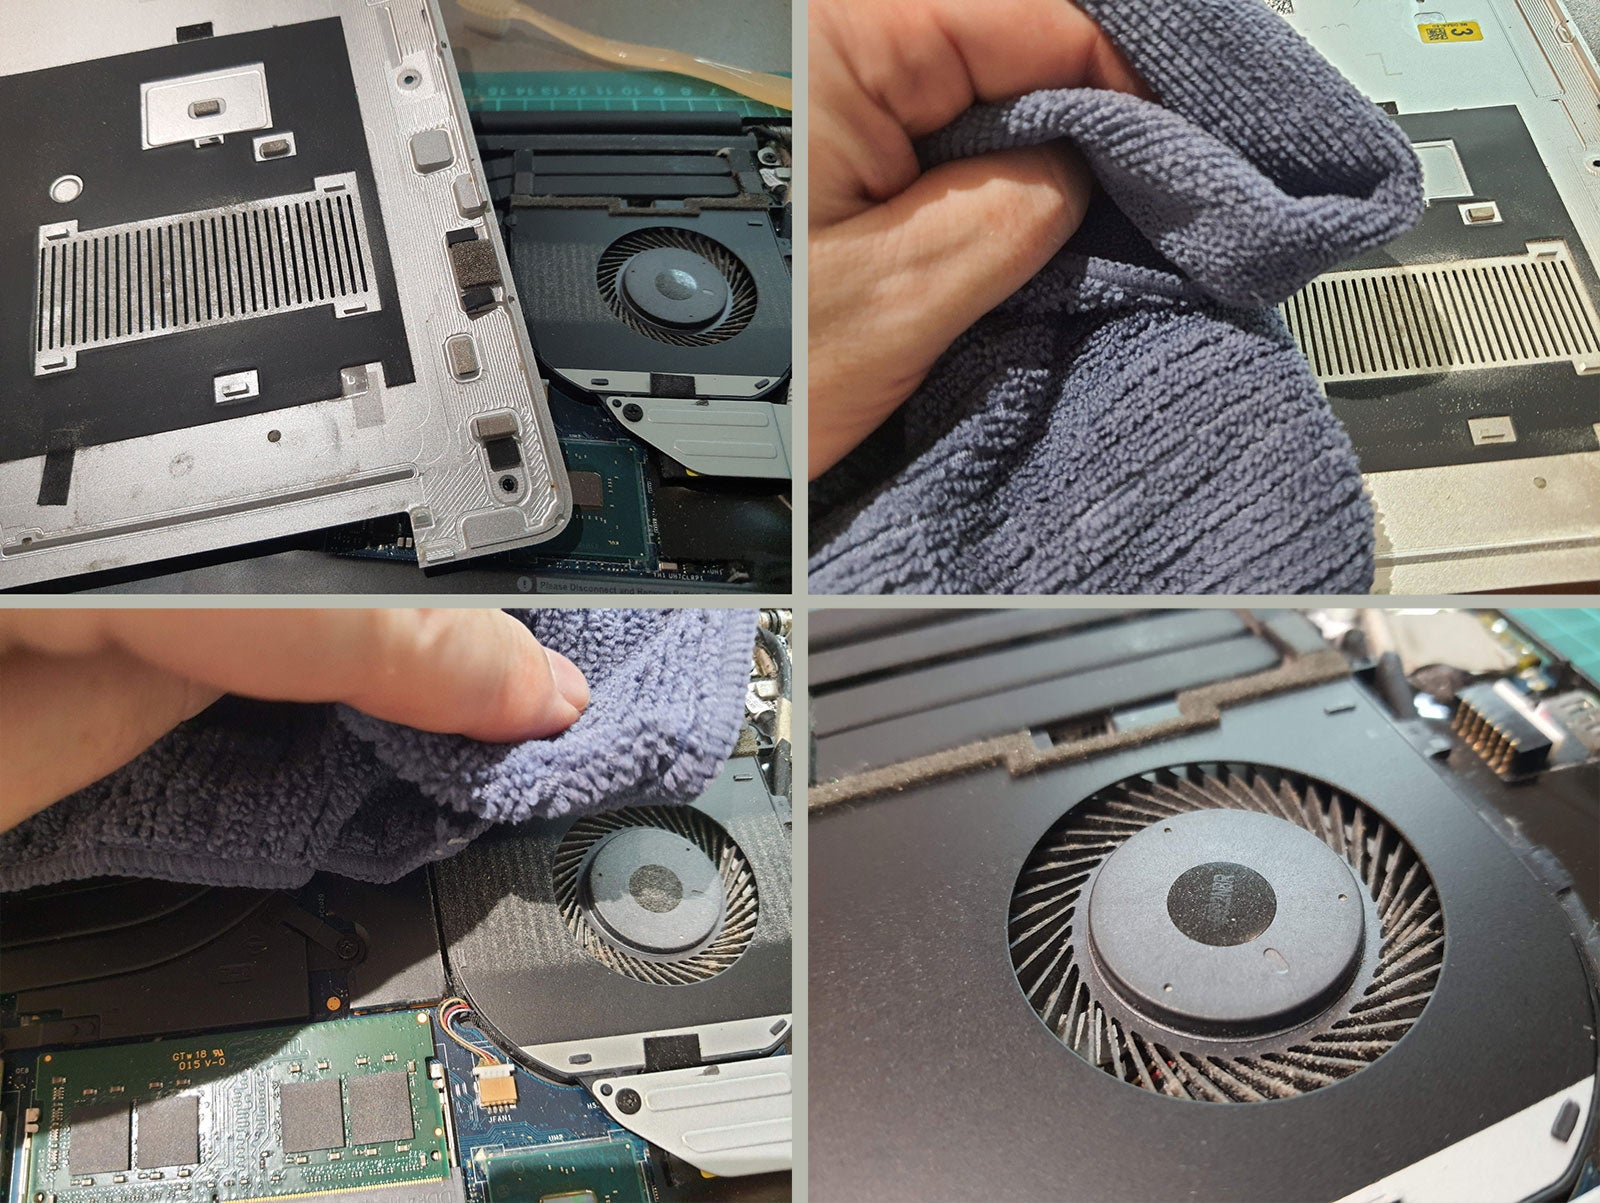 Ensure that your computer's cooling system is functioning properly and not clogged with dust.
Use compressed air or a soft brush to clean the vents and fans of your computer.